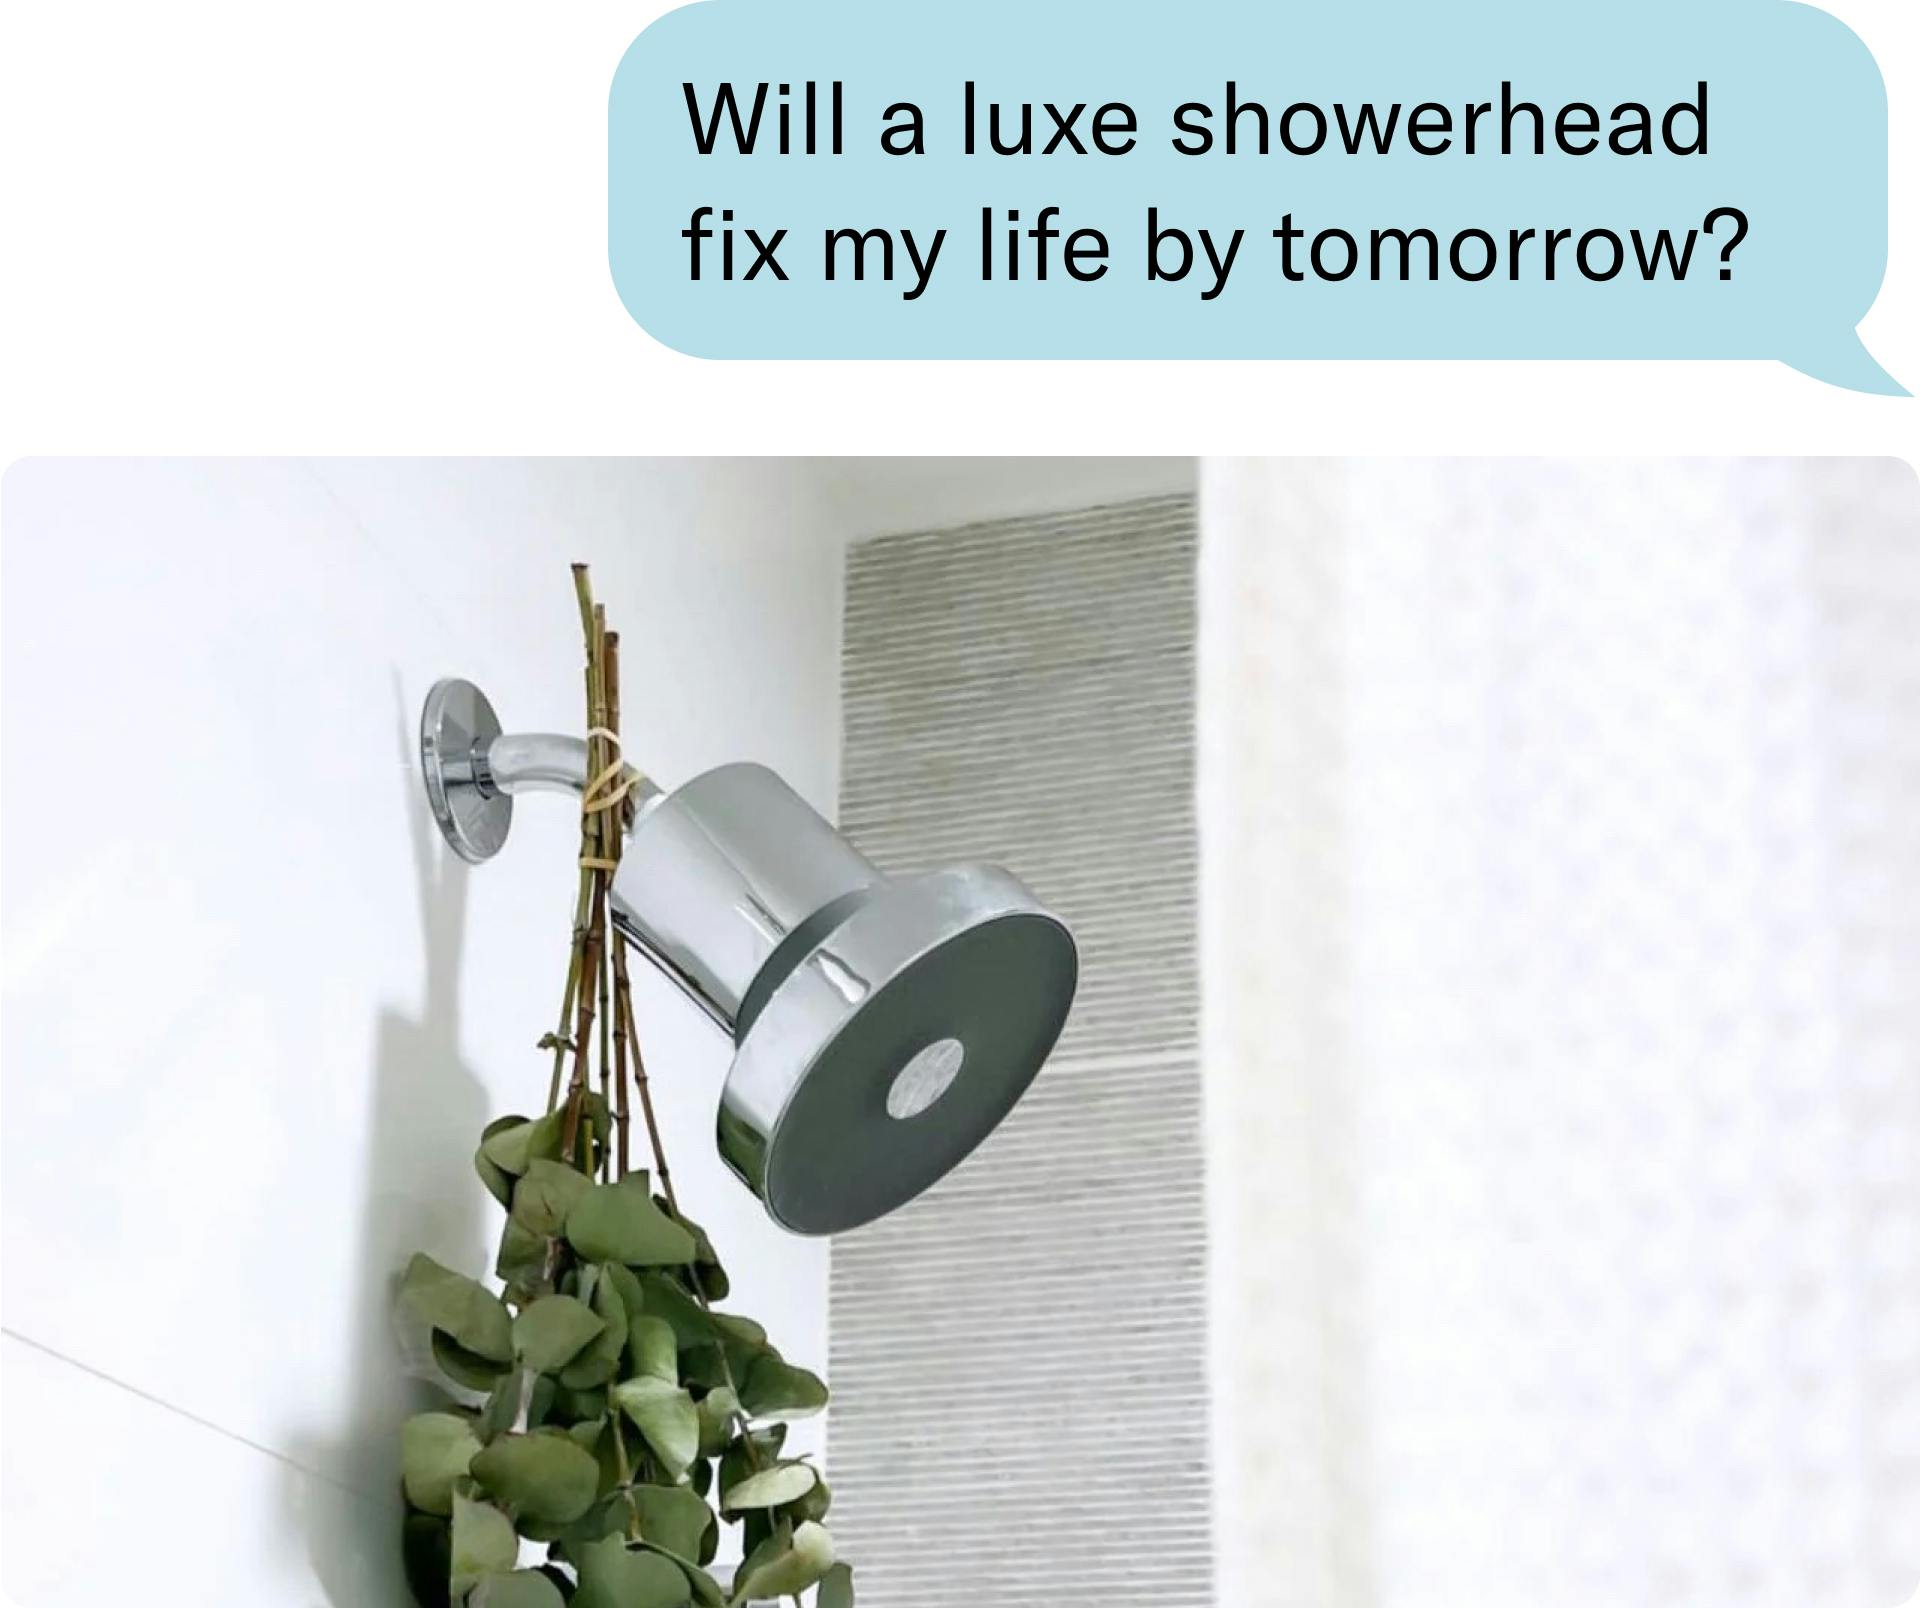 Will a luxe showerhead fix my life by tomorrow?